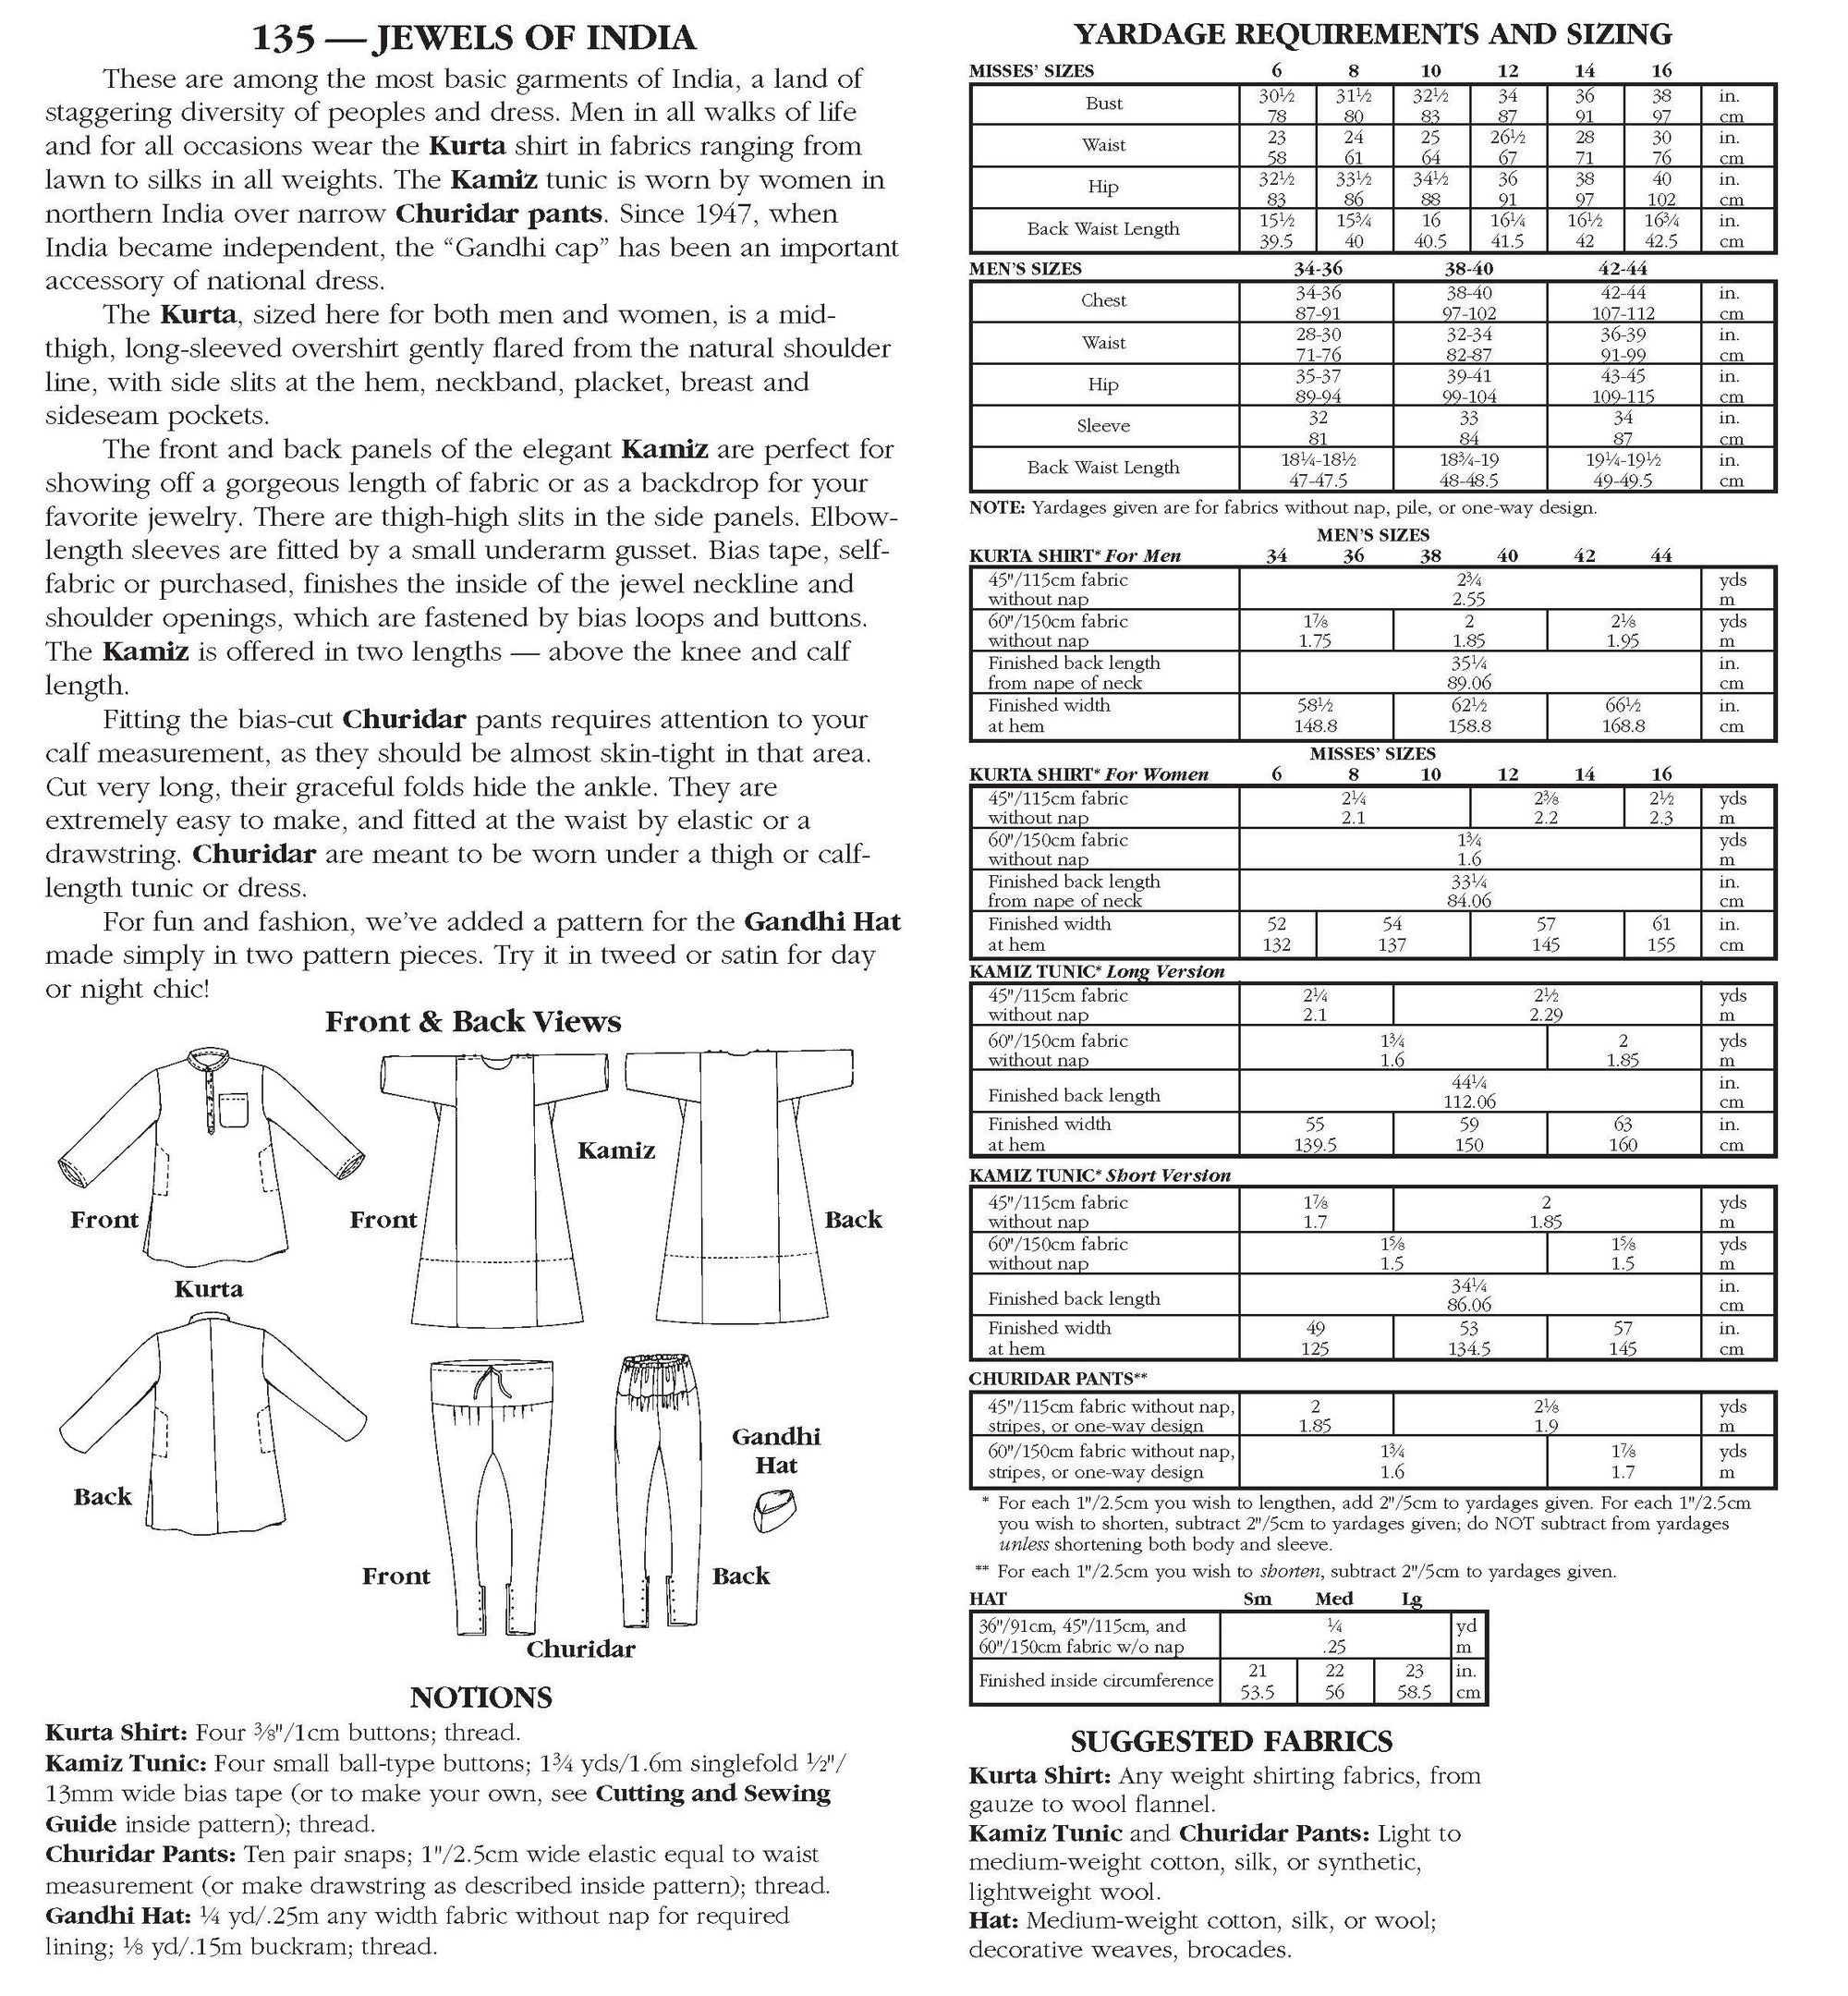 Photo of back cover shows size and yardage chart. Includes fabric suggestions and description.